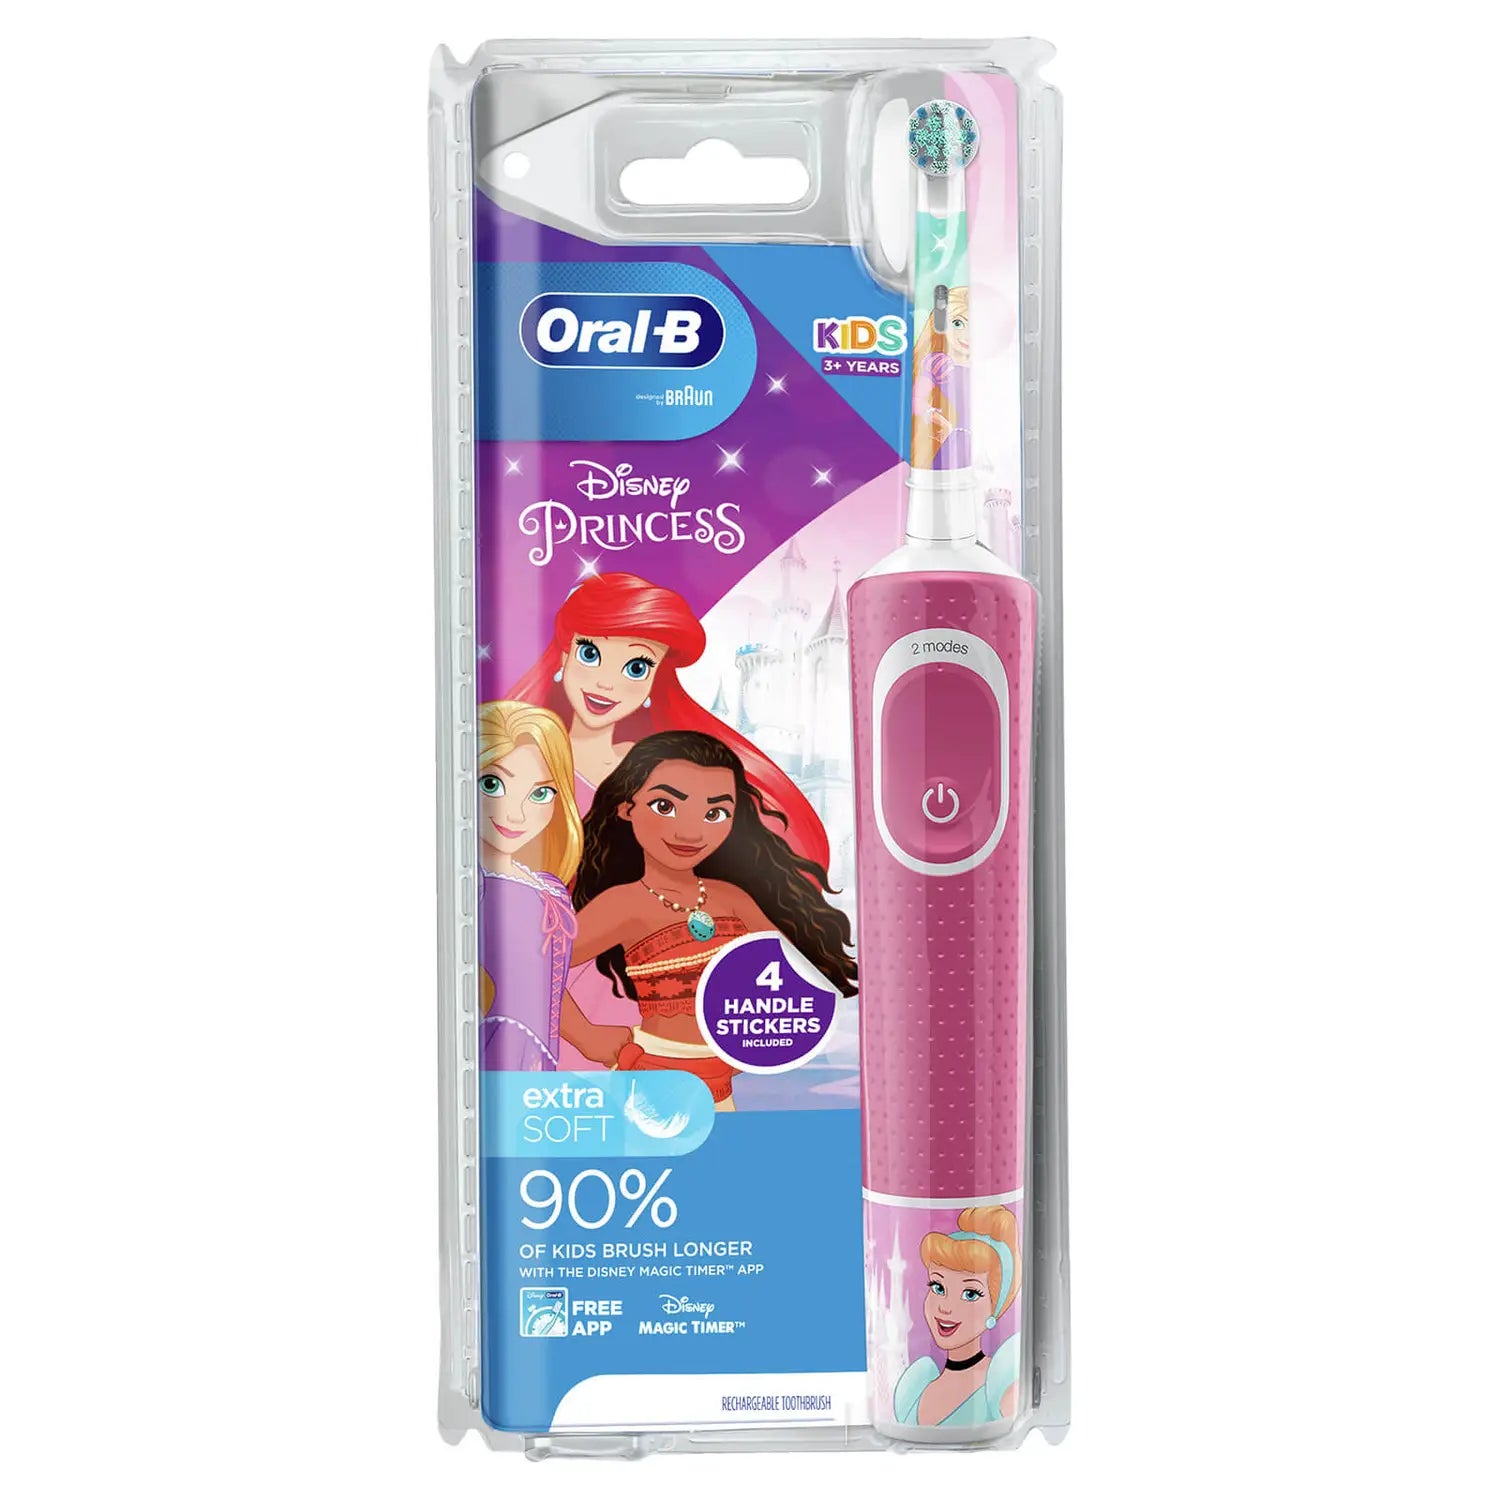 Oral-B Kids Electric Rechargeable Toothbrush Disney Princess